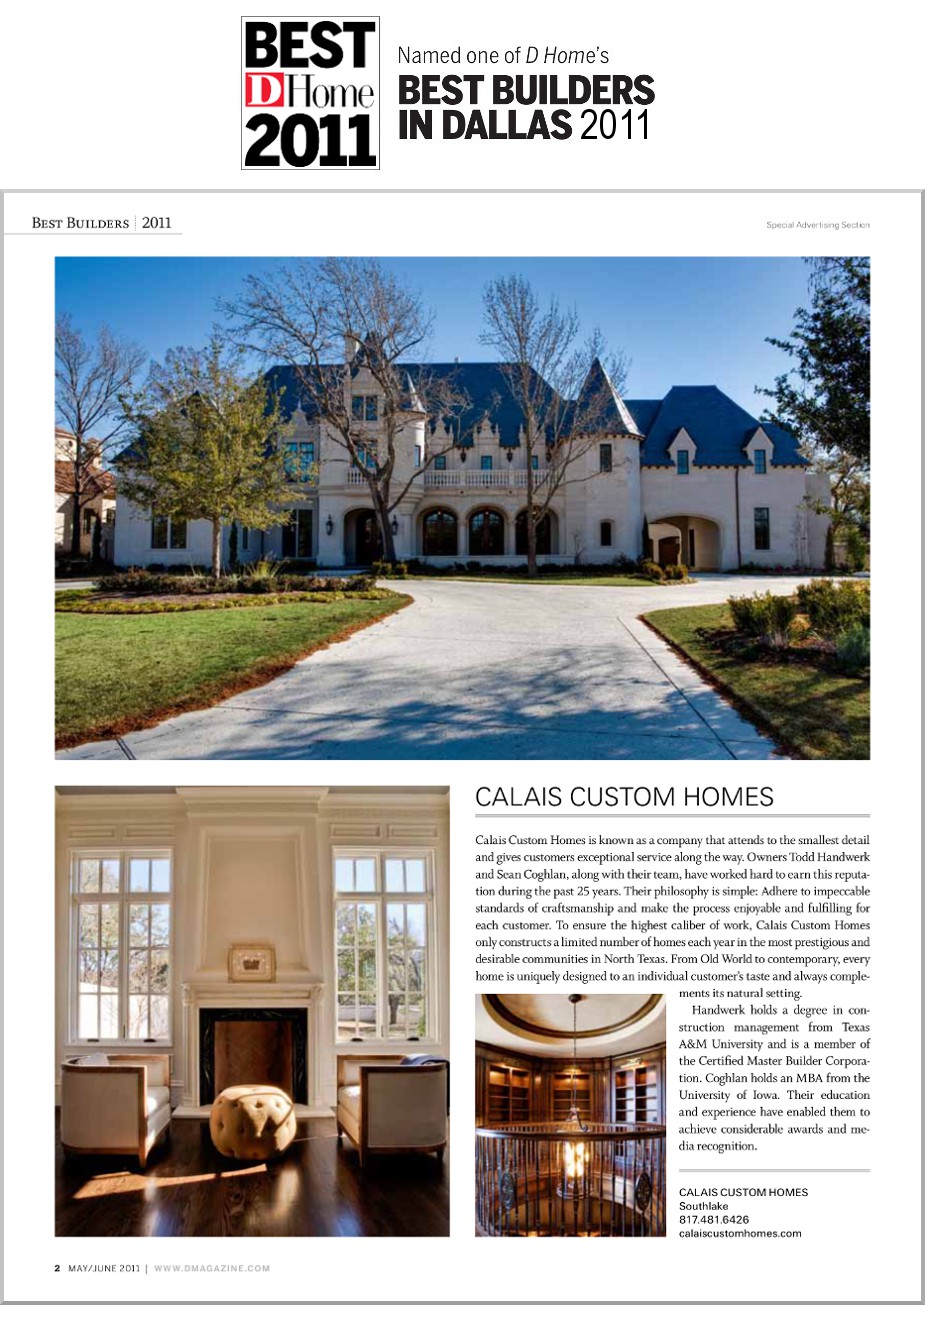 2011 DHome Best Builder Award Article